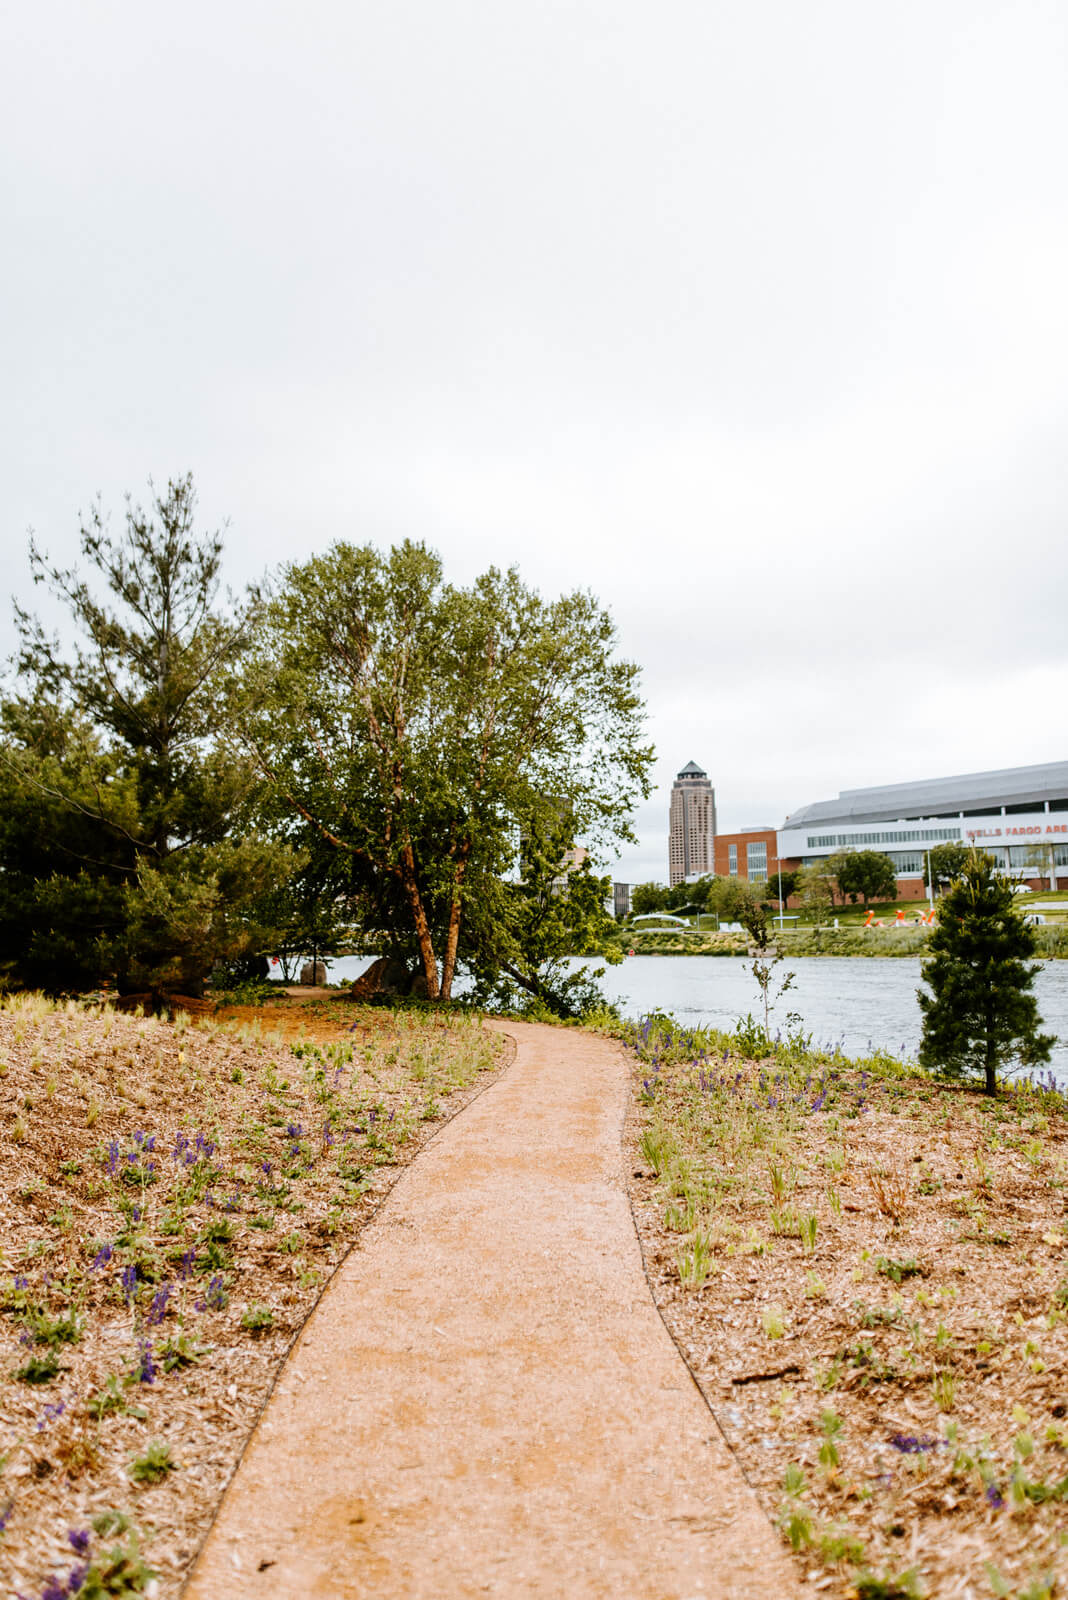 A dirt path in-between garden beds alongside a river with a skyline in the background.